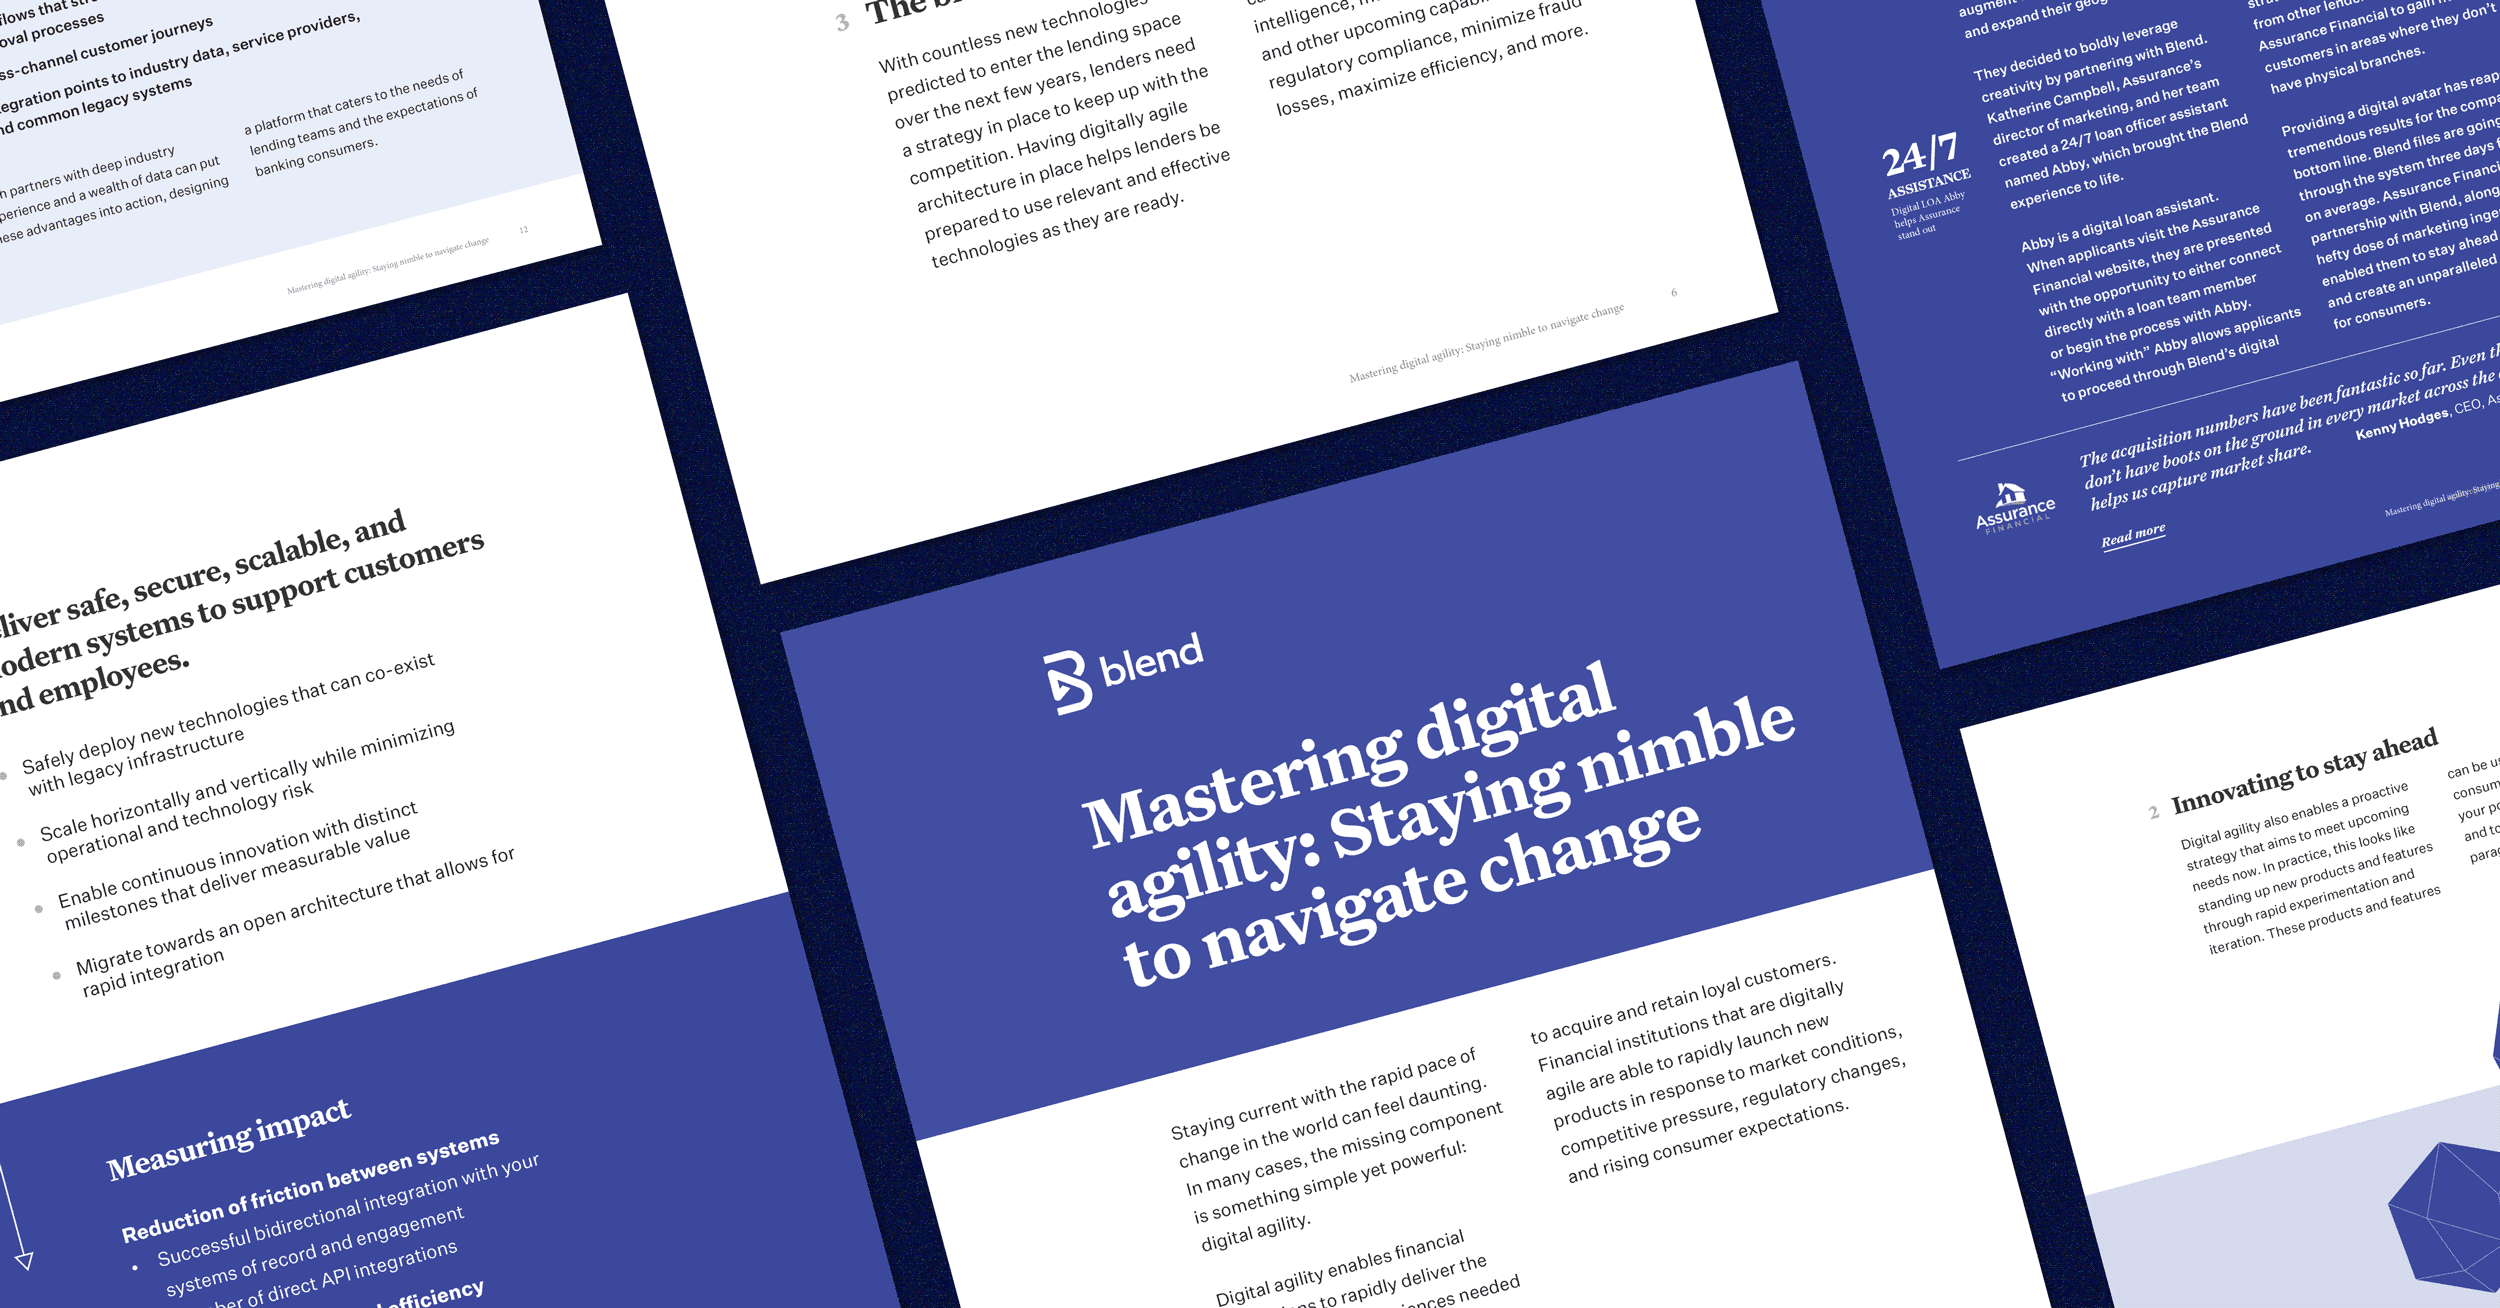 Preview of the "Mastering digital agility" ebook